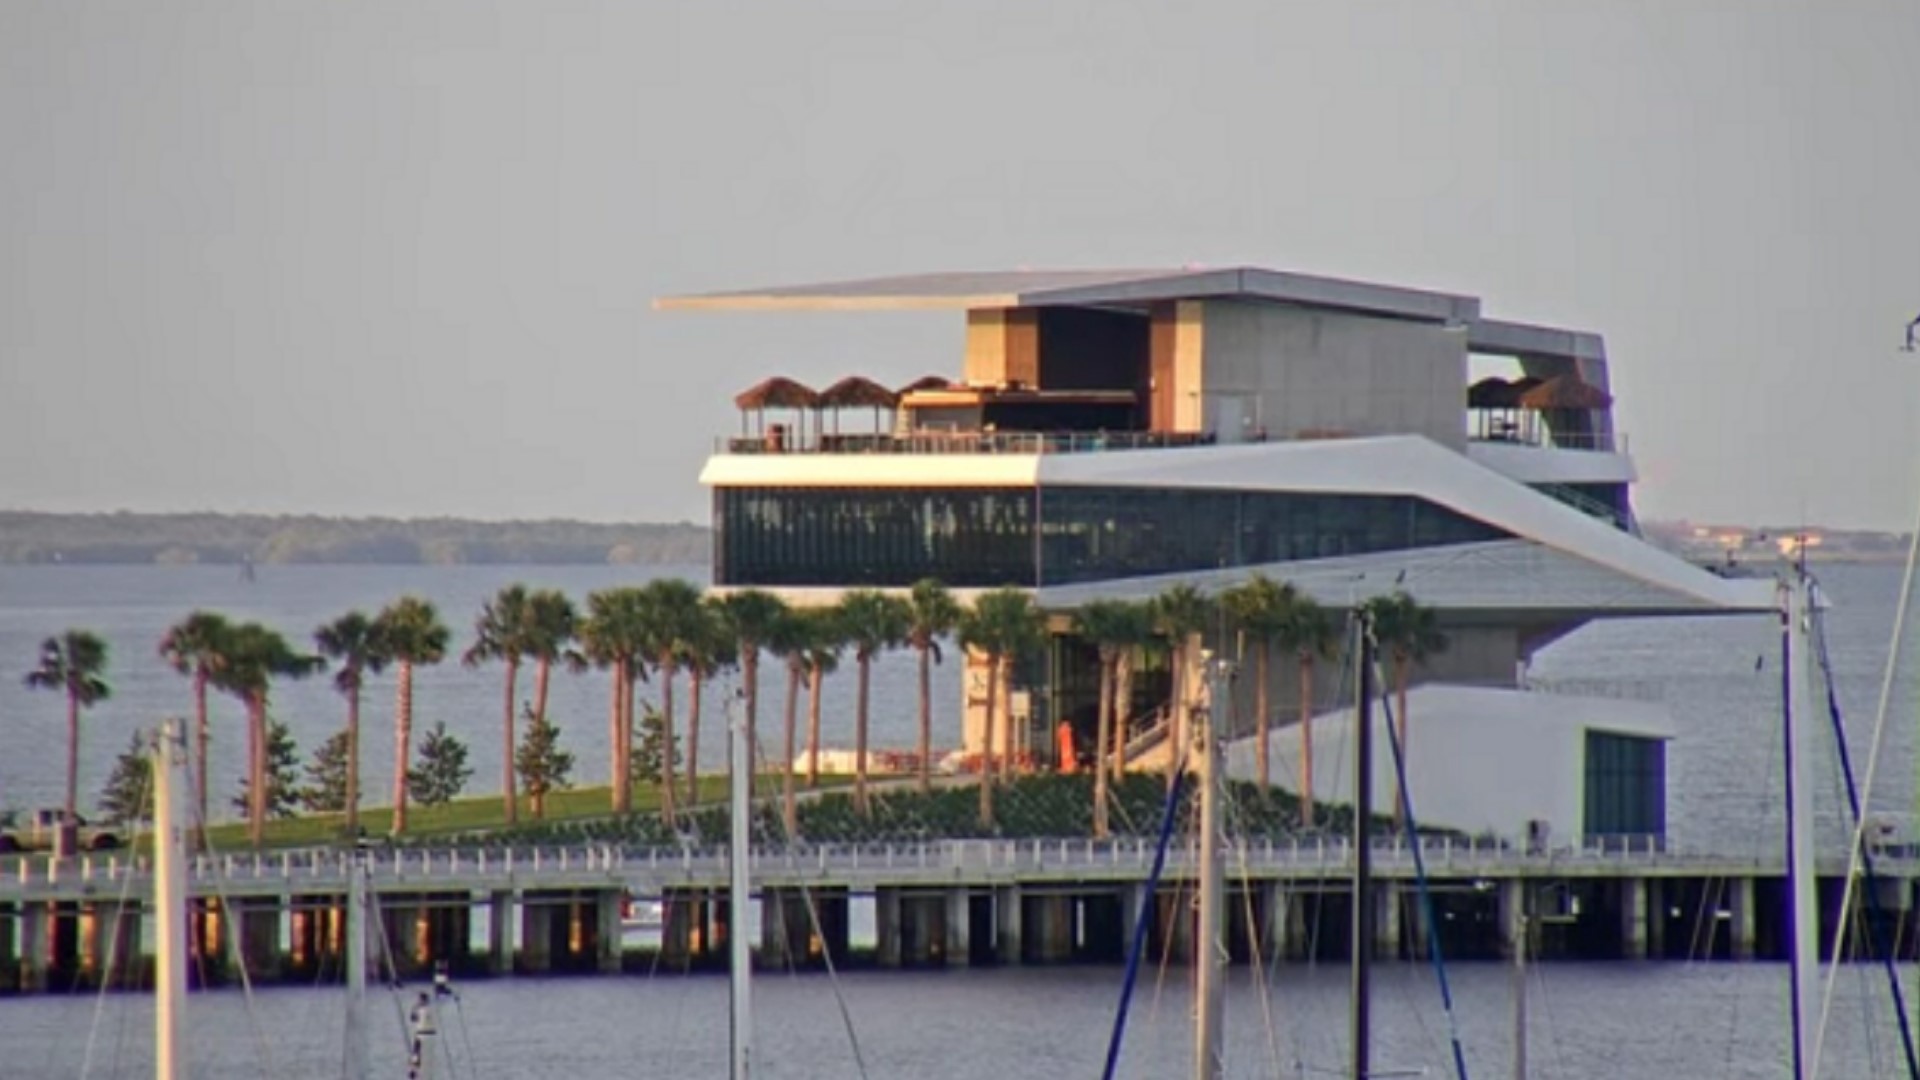 After years of construction, the new, $86 million pier is set to open on Monday. 10 Tampa Bay got a sneak peak.